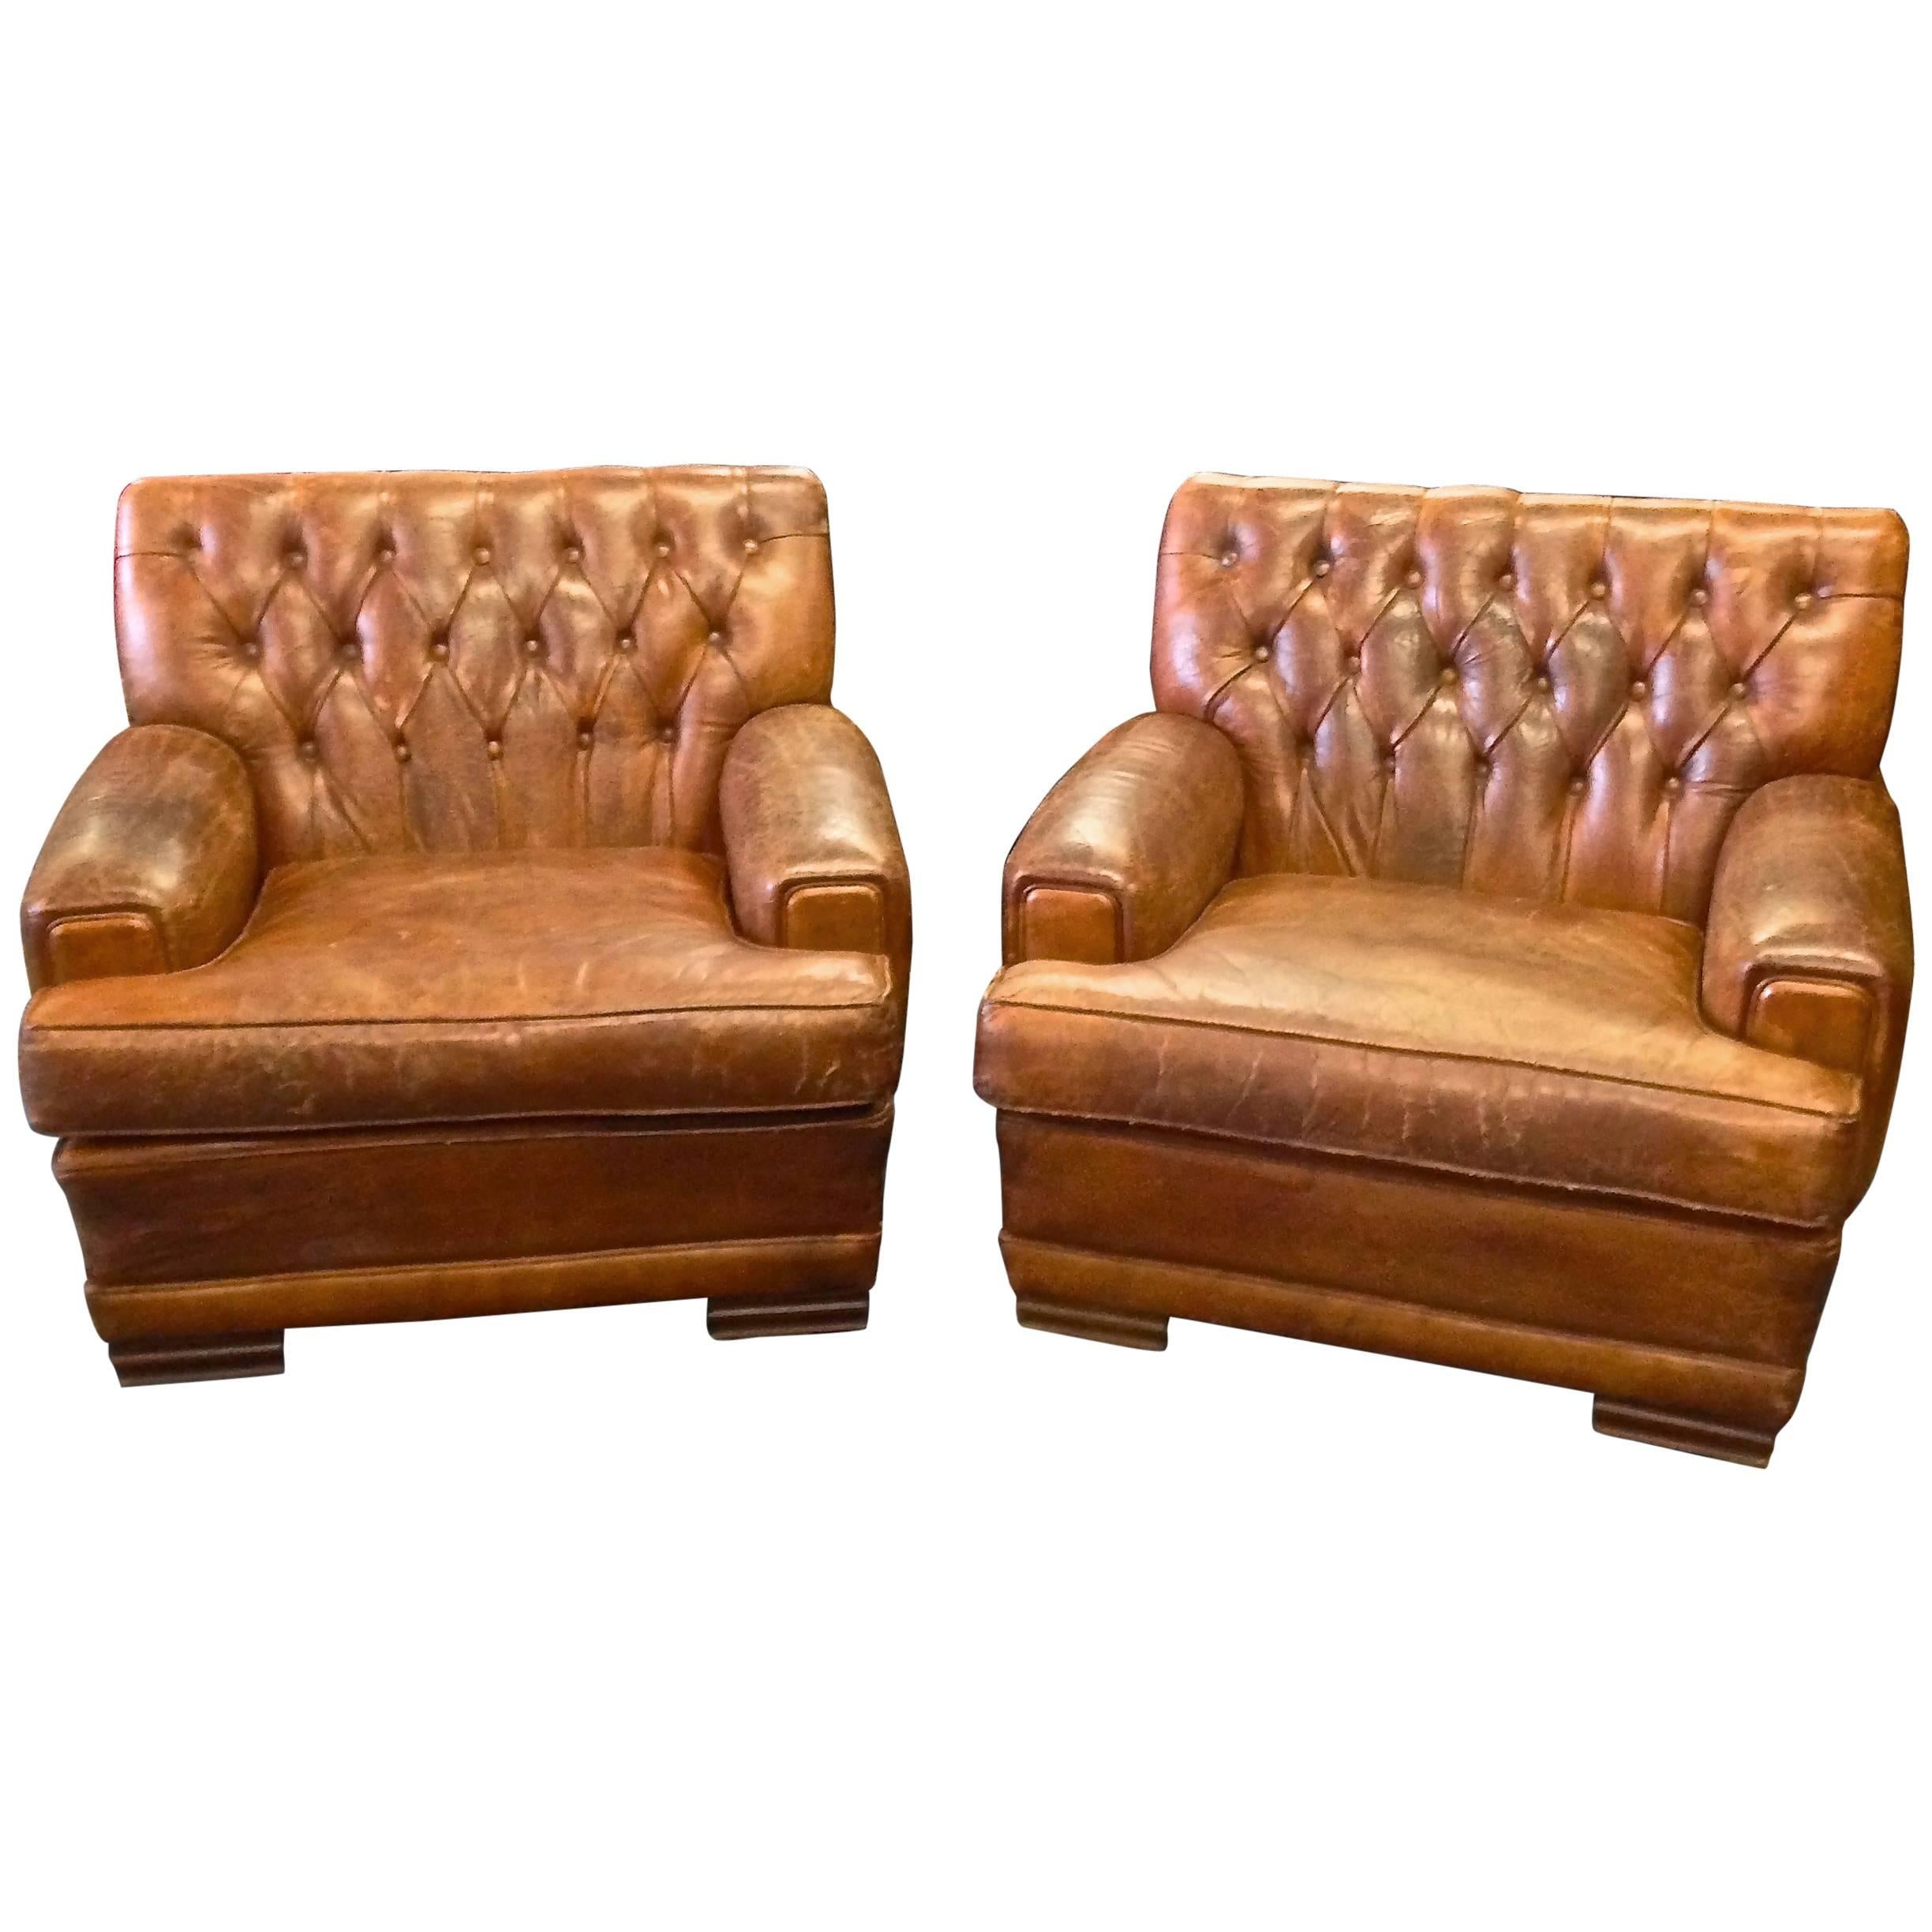 Pair of Original 1920s French Art Deco Button Tufted Leather Club Chairs For Sale